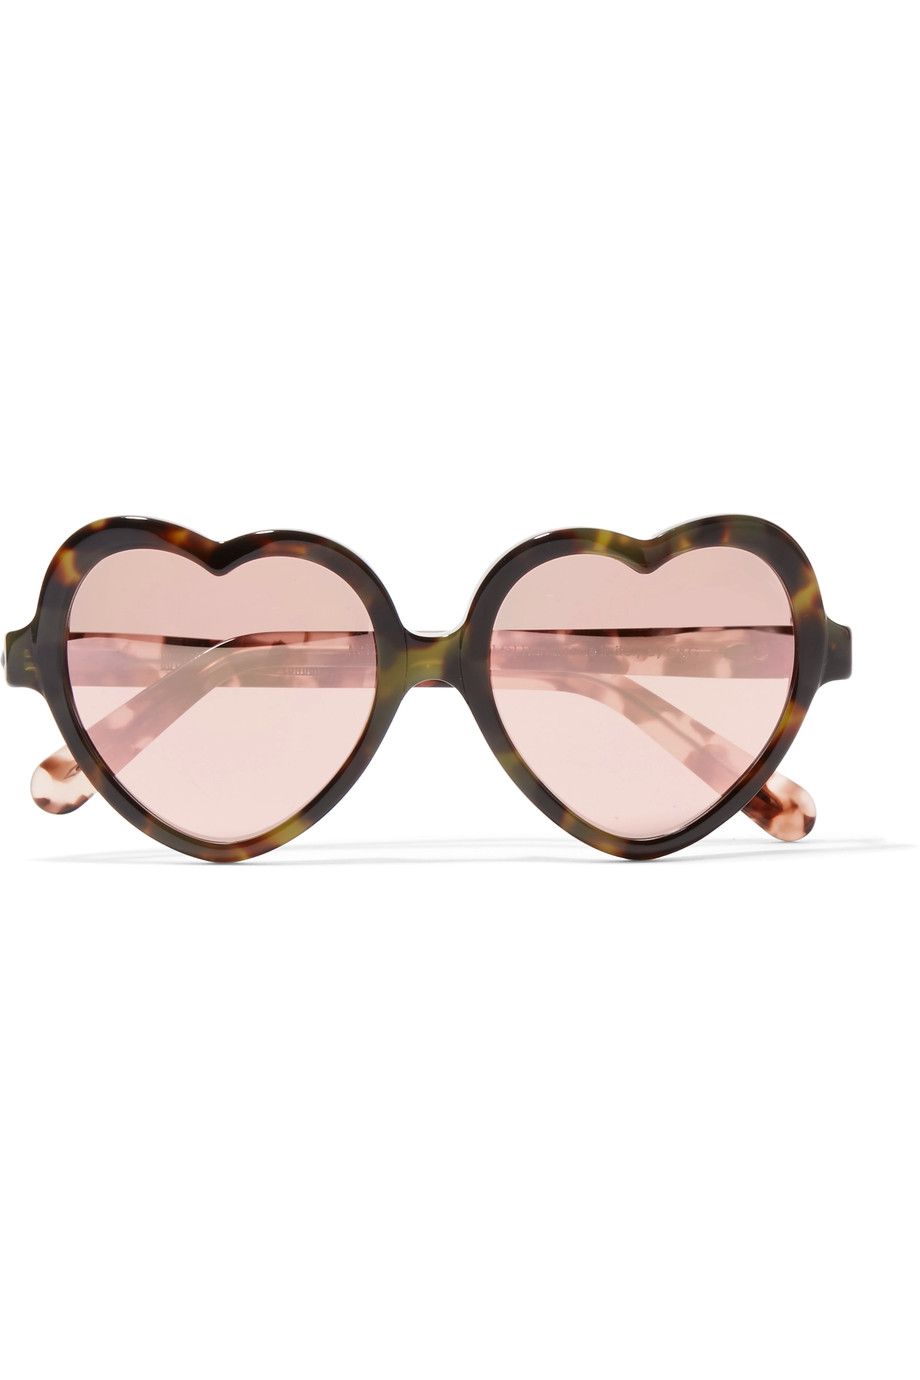 Eyewear, Sunglasses, Glasses, Pink, Personal protective equipment, Vision care, Brown, Peach, Goggles, Heart, 